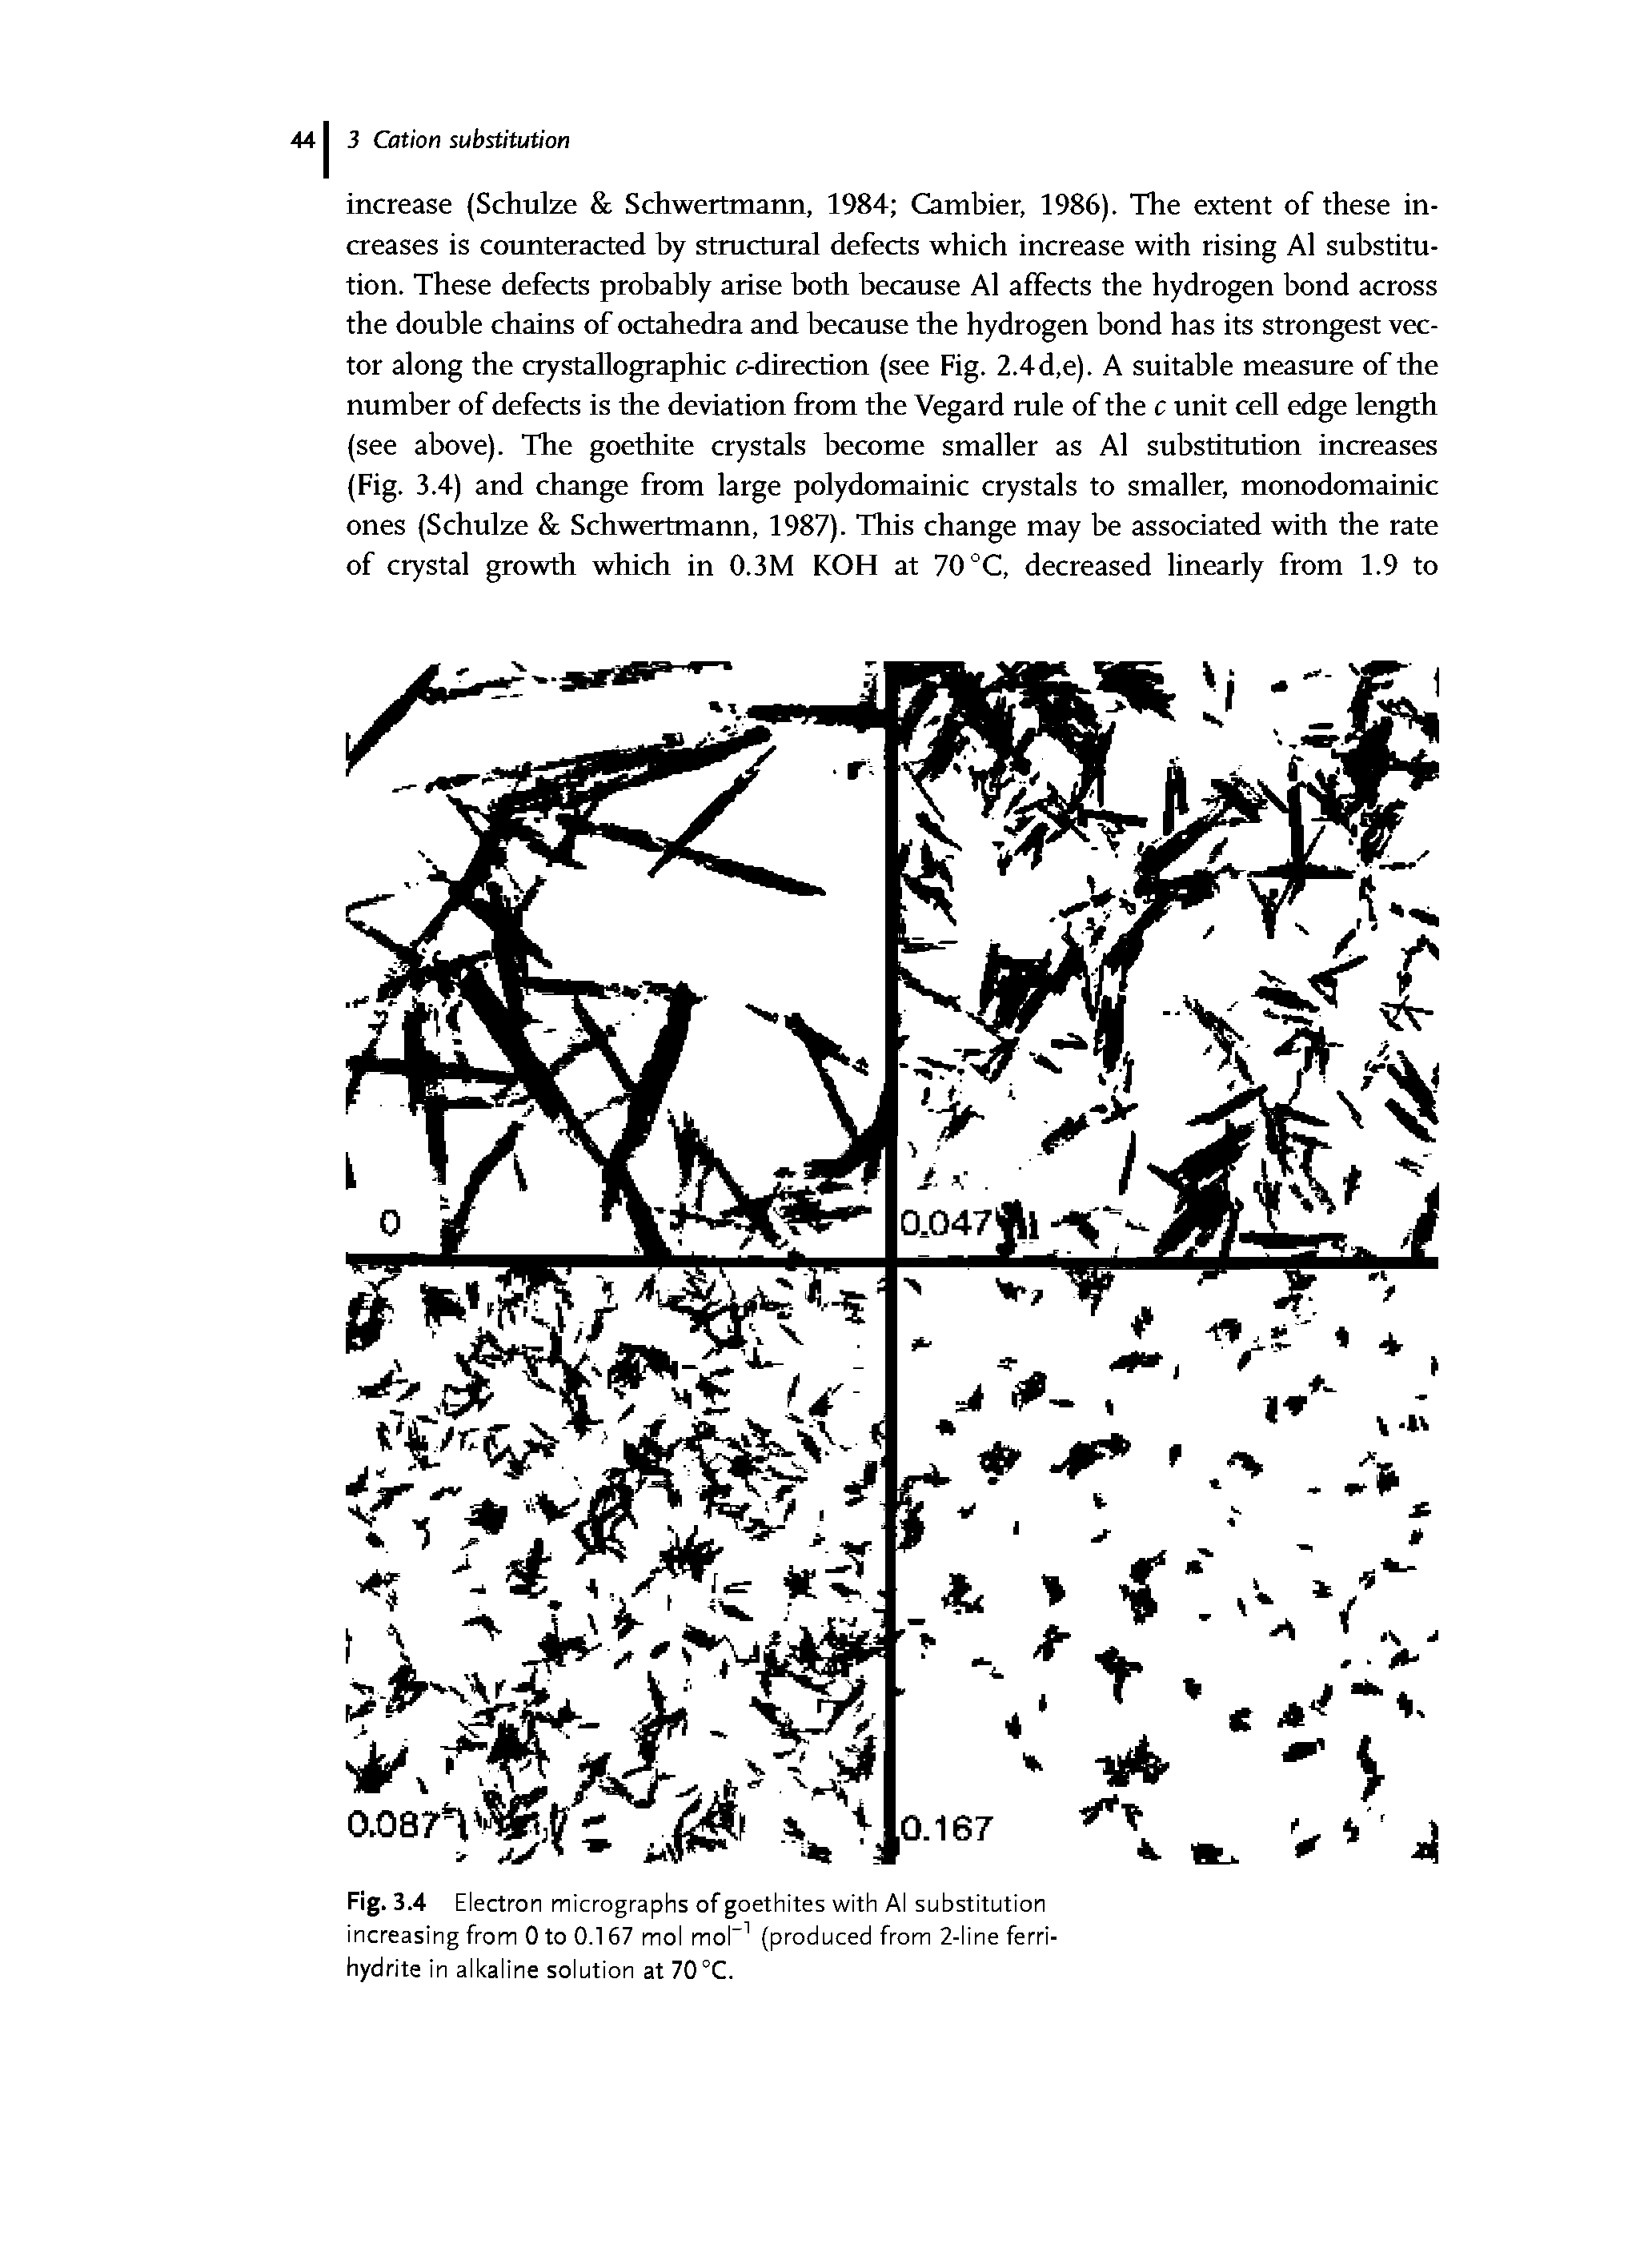 Fig. 3.4 Electron micrographs of goethites with Al substitution increasing from 0 to 0.167 mol mol" (produced from 2-line ferri-hydrite in alkaline solution at 70°C.